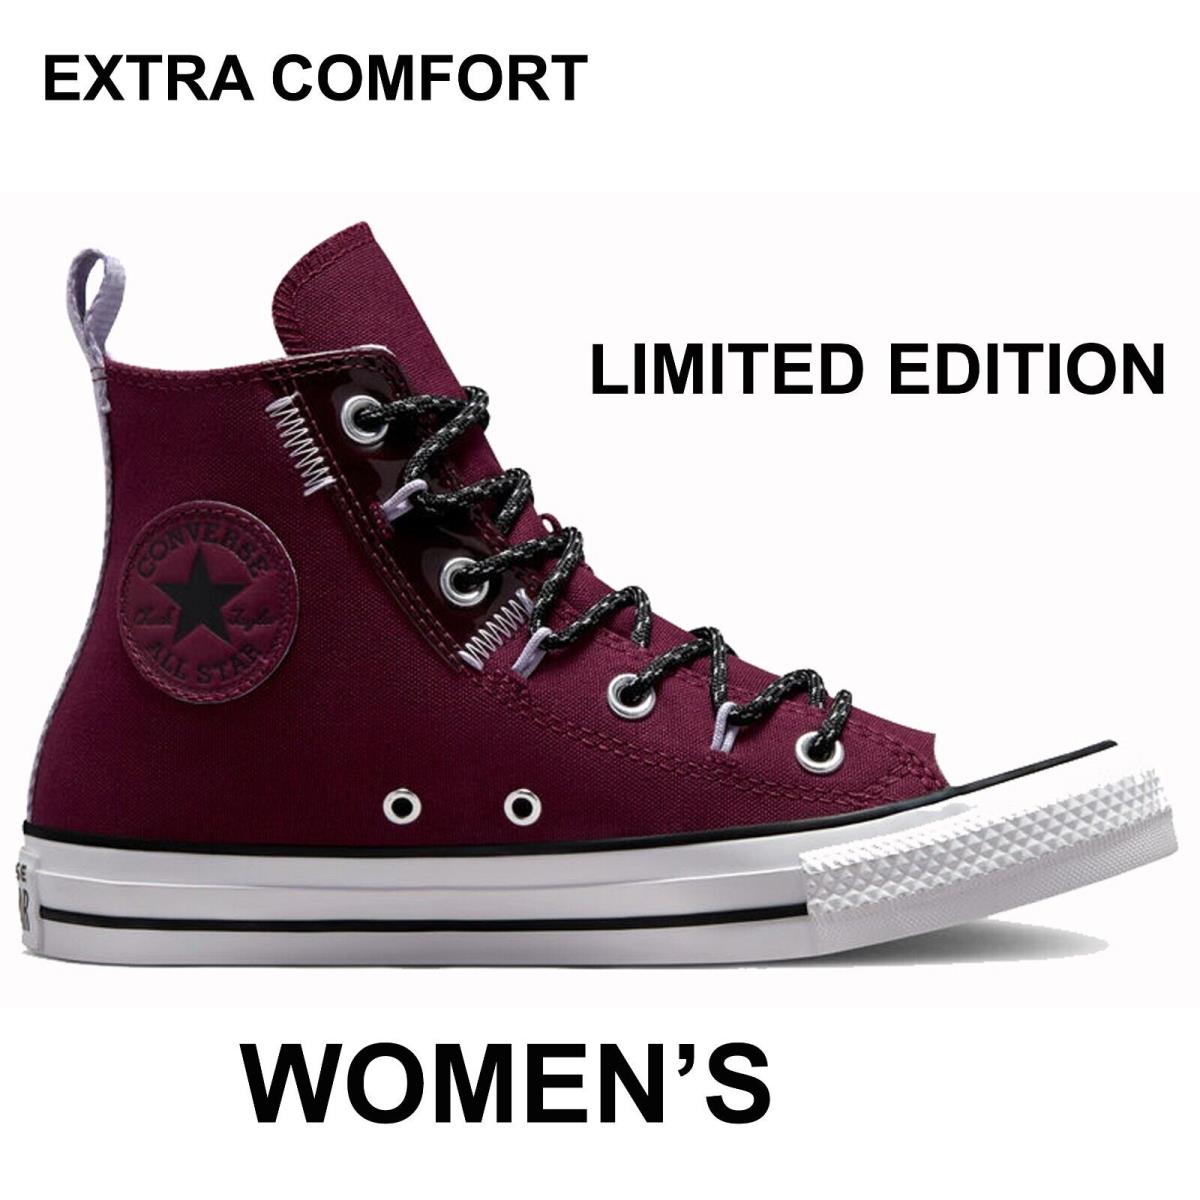 Converse Women`s Chuck Taylor All Star Craft Ctas Shoes Limited Edition